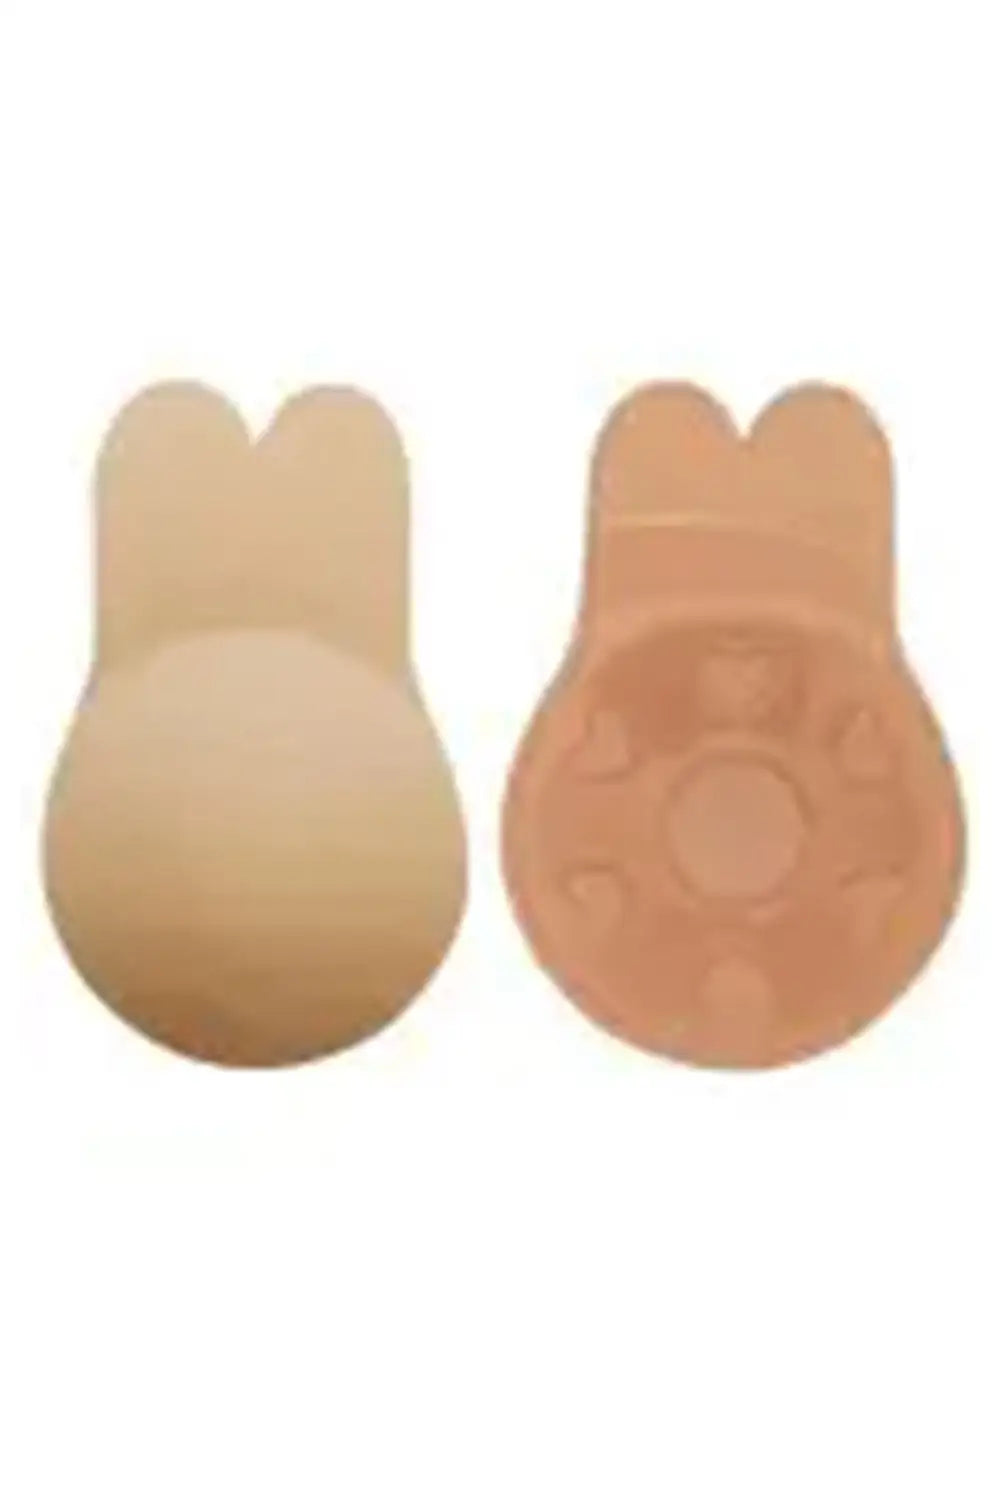 Nude invisible lift-up rabbit ears seamless nipple covers -